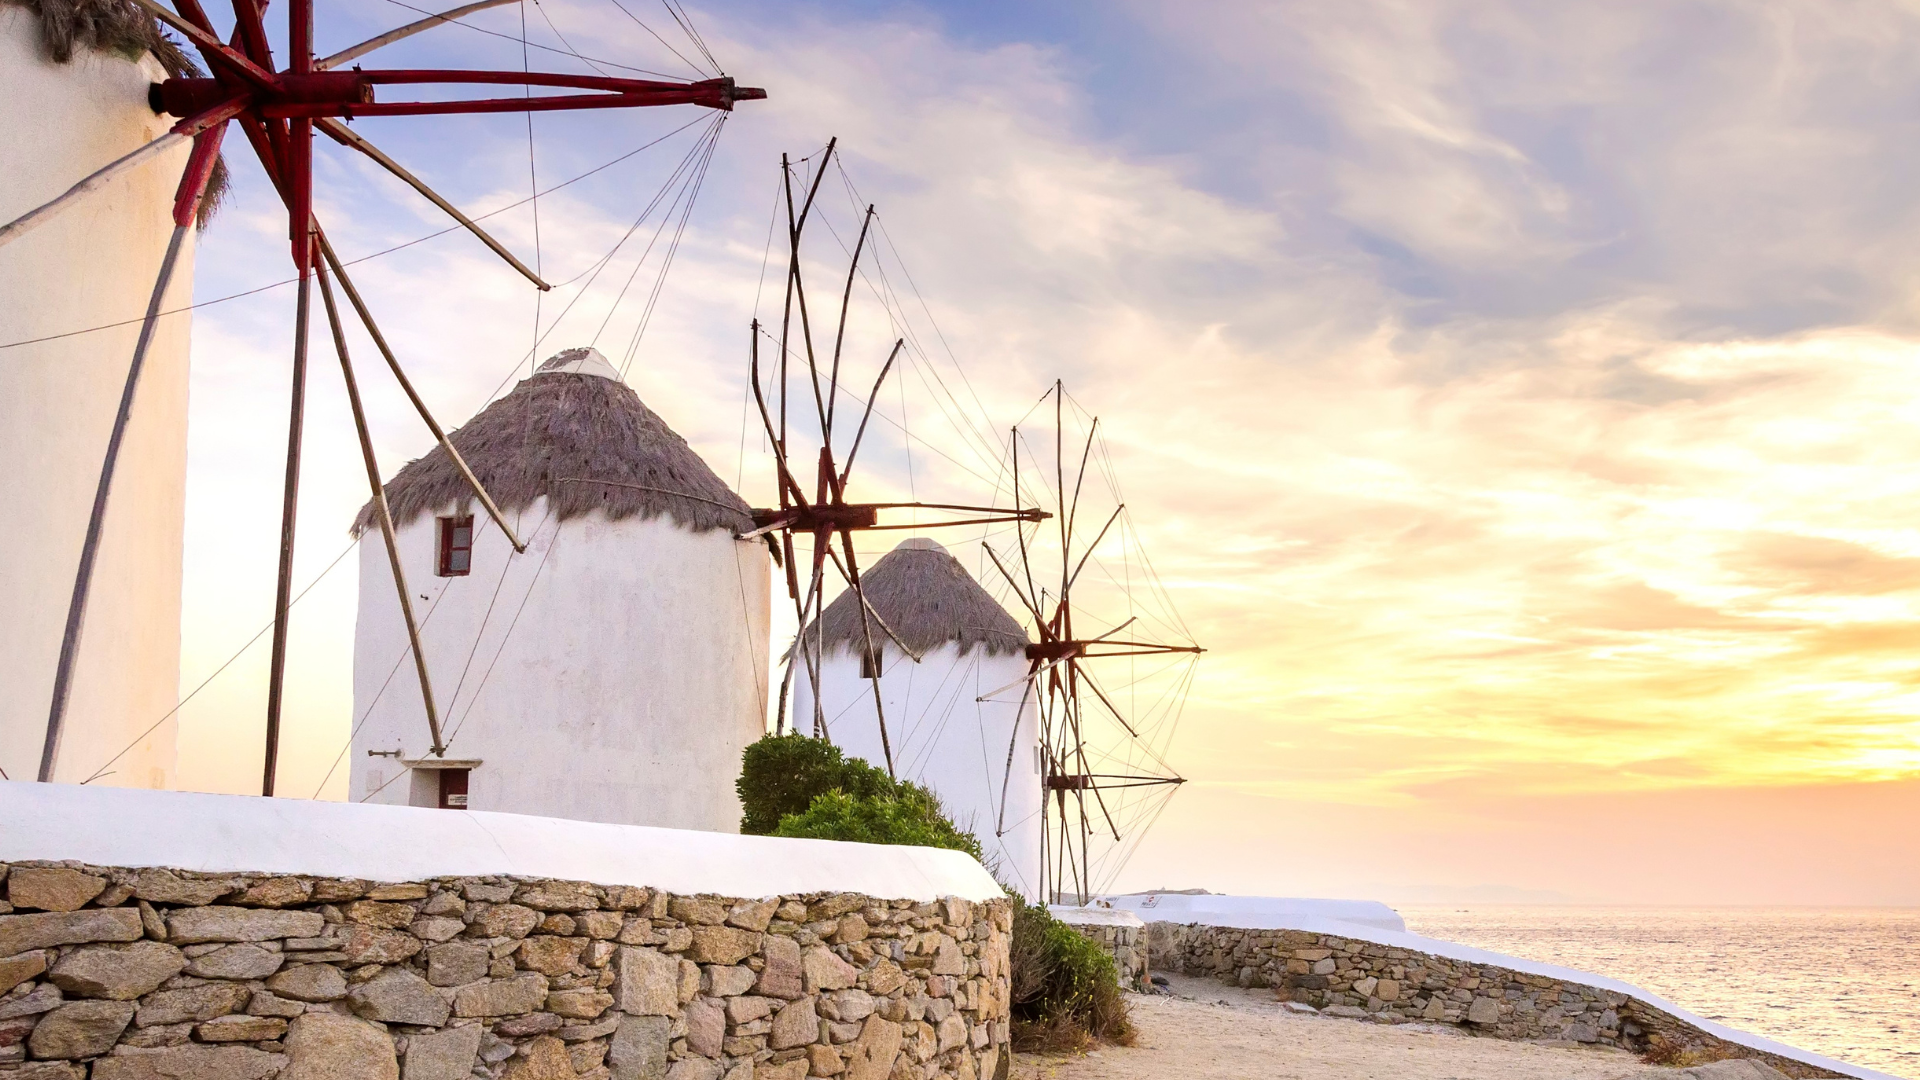 Sunrise hotel and suites Mykonos-Vivestia | Risk-Free Villas, Hotels and Cruises in VR